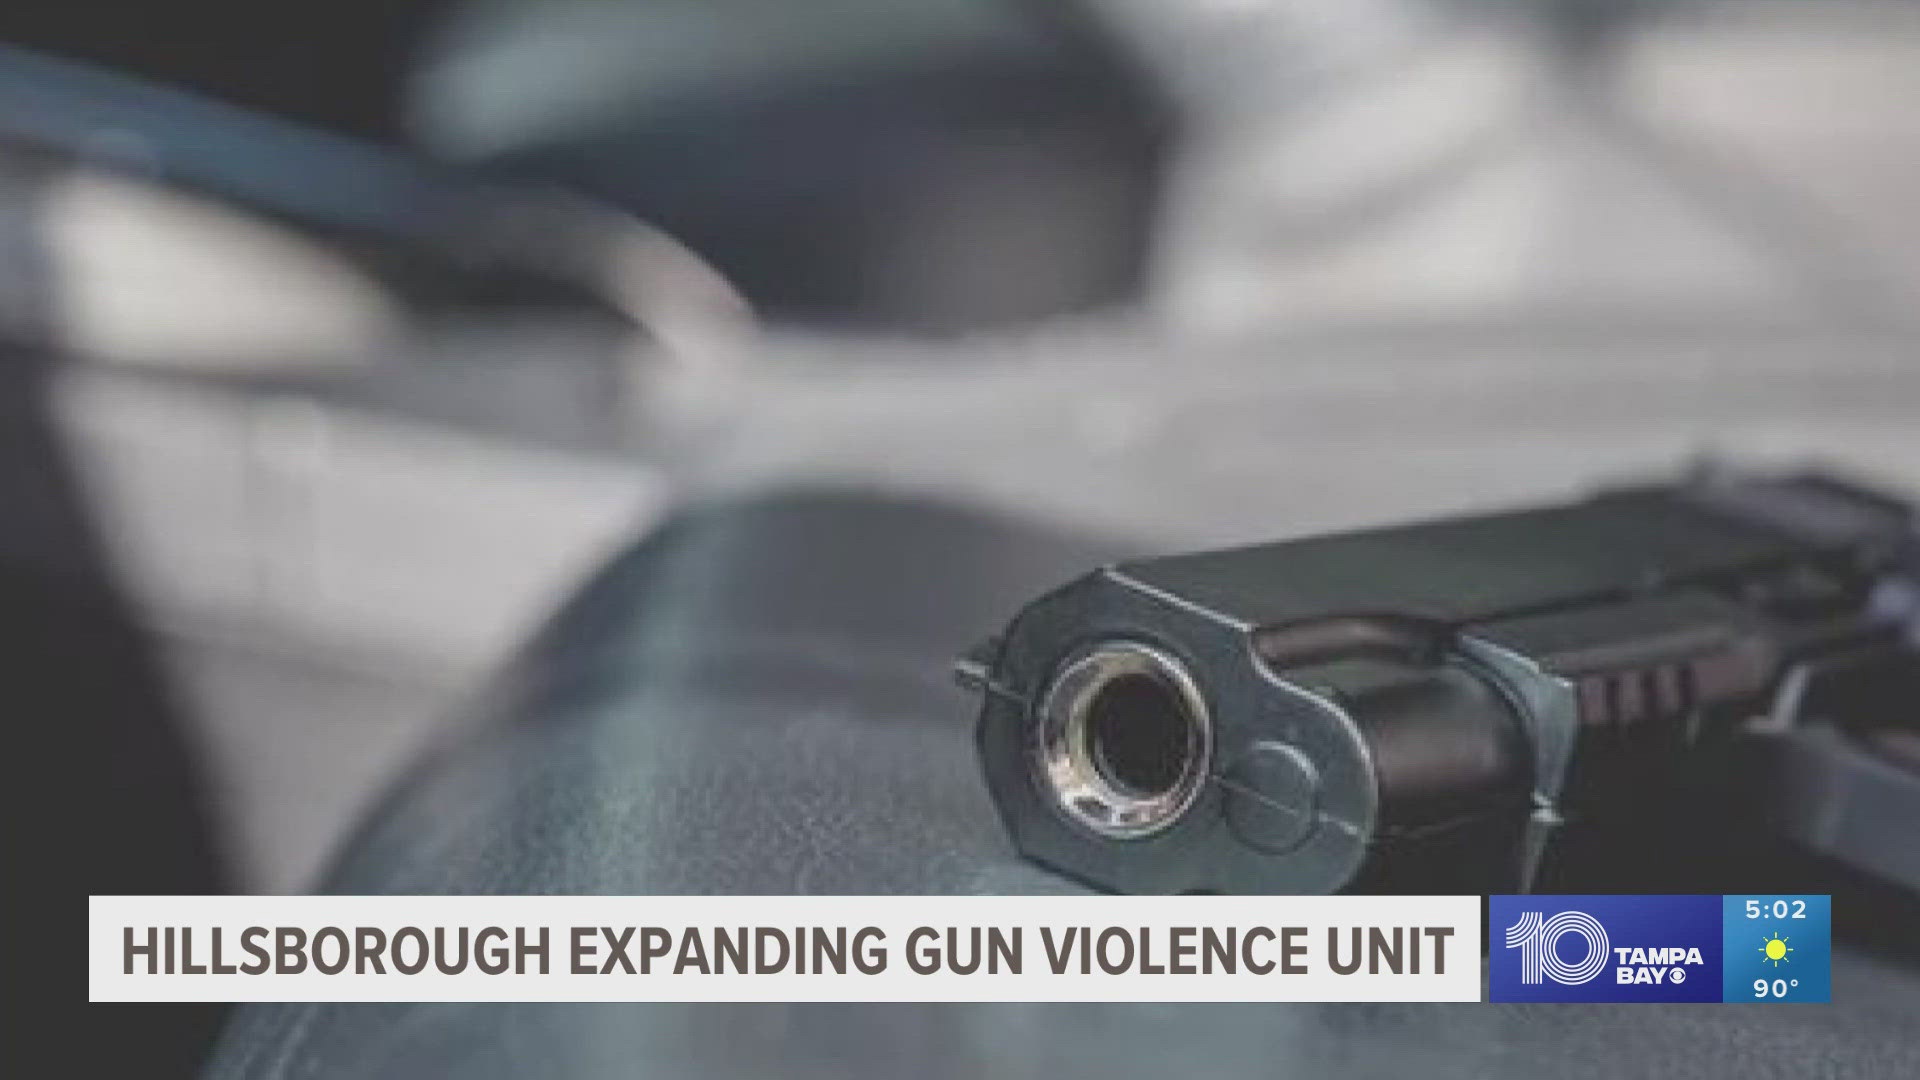 The Hillsborough State Attorney's office will expand its gun violence unit to ensure more gun violence prosecutors are accessible.